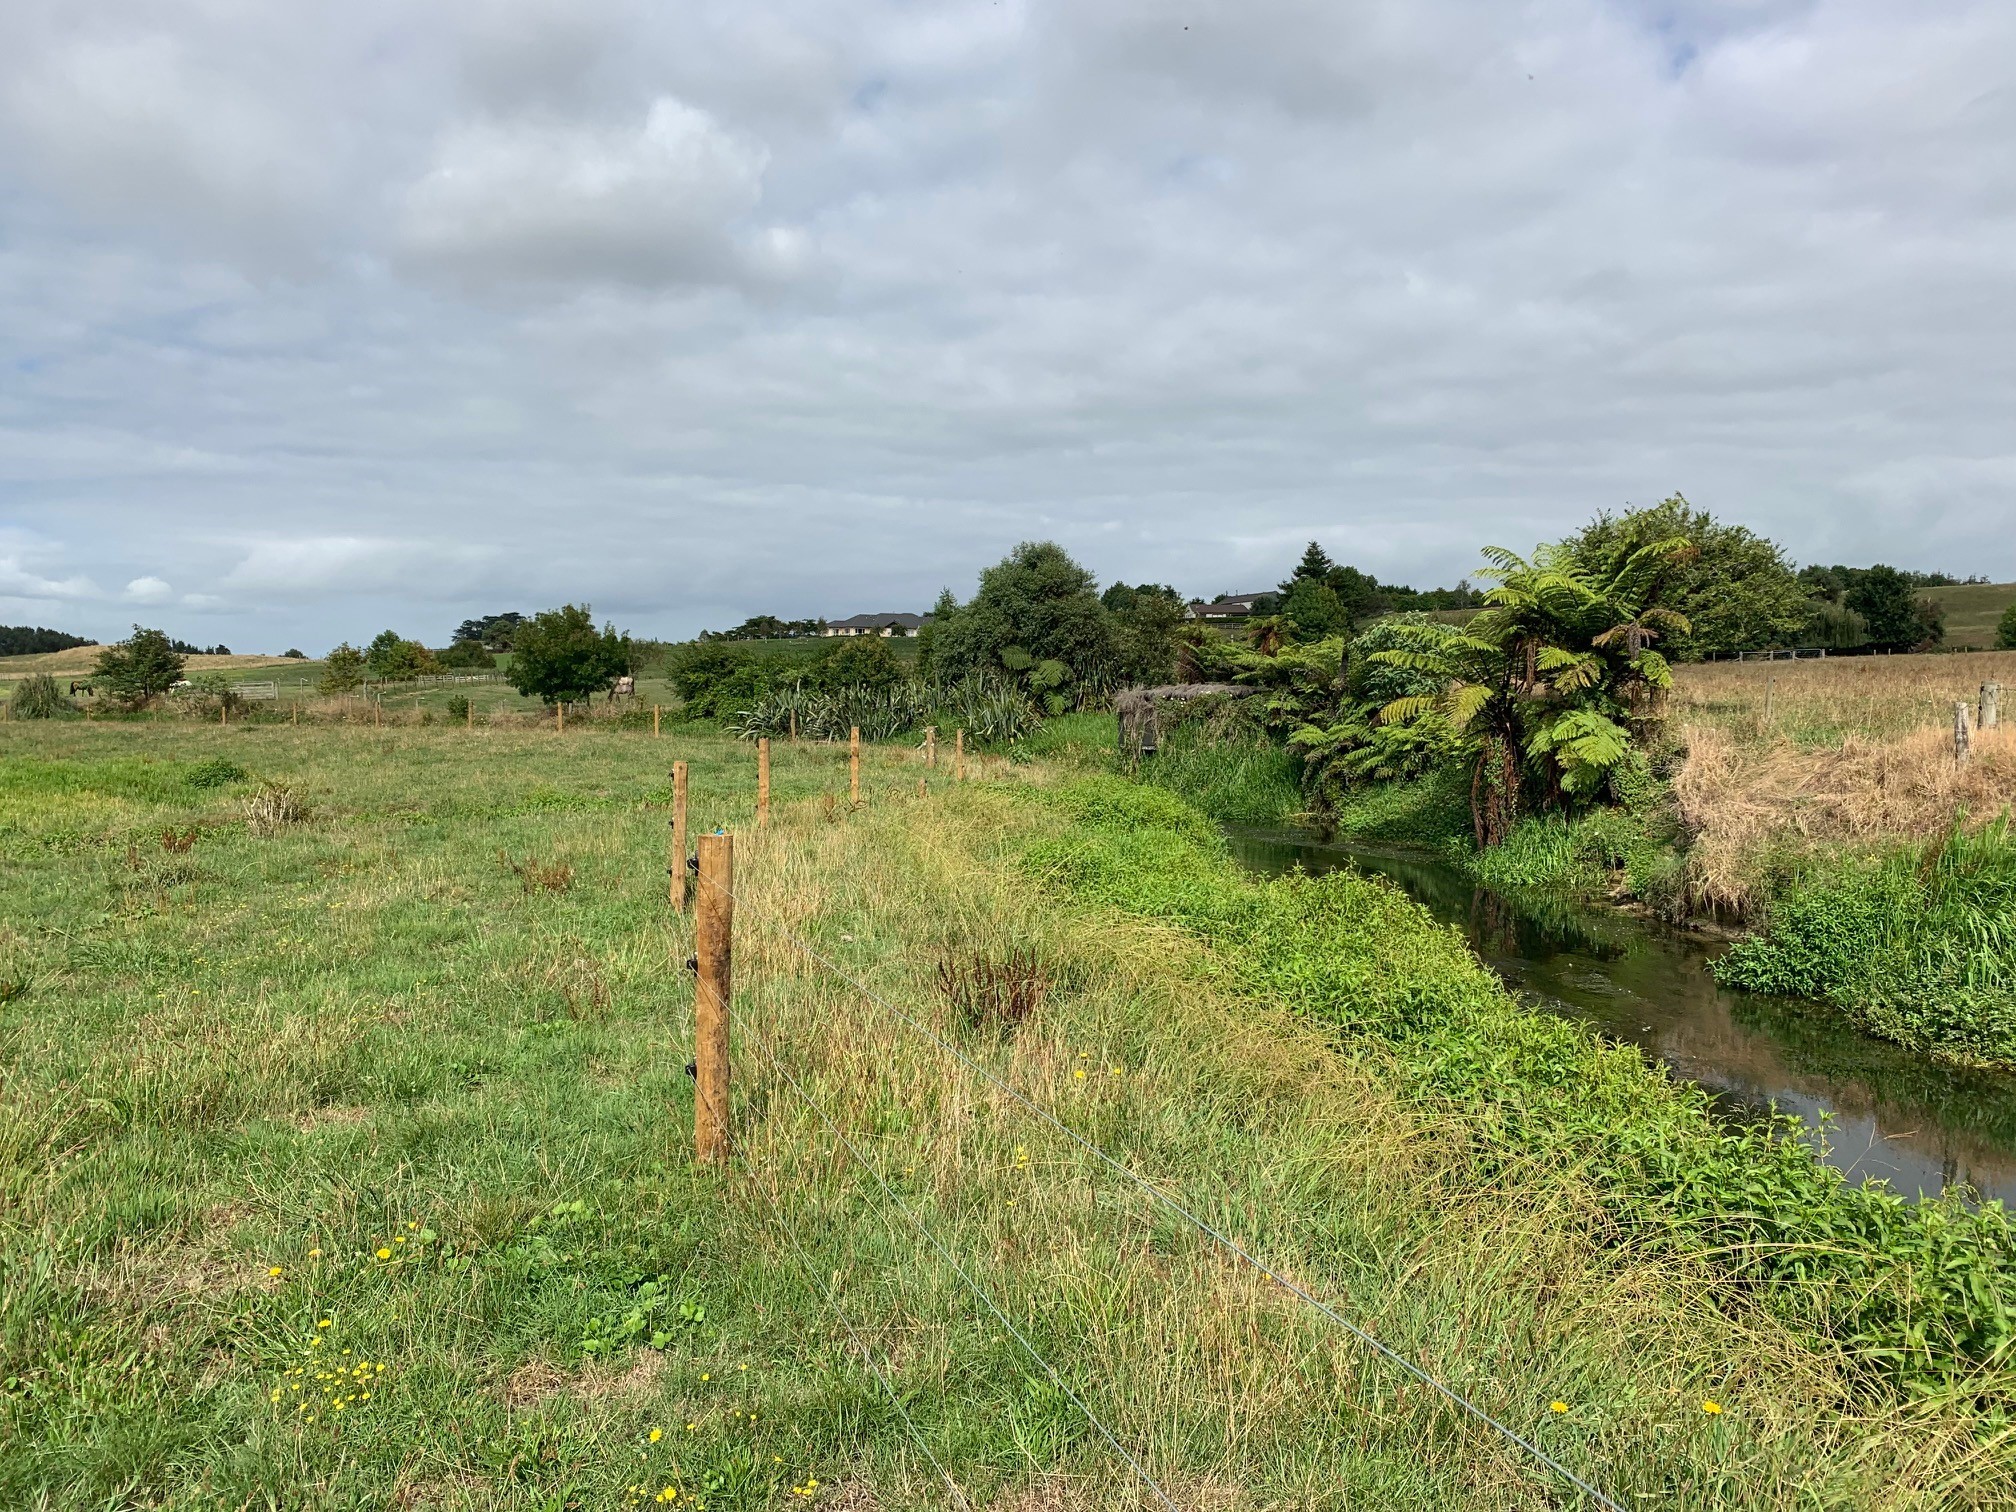 Applications can be made to the fund to support fencing projects to keep stock out of waterways.